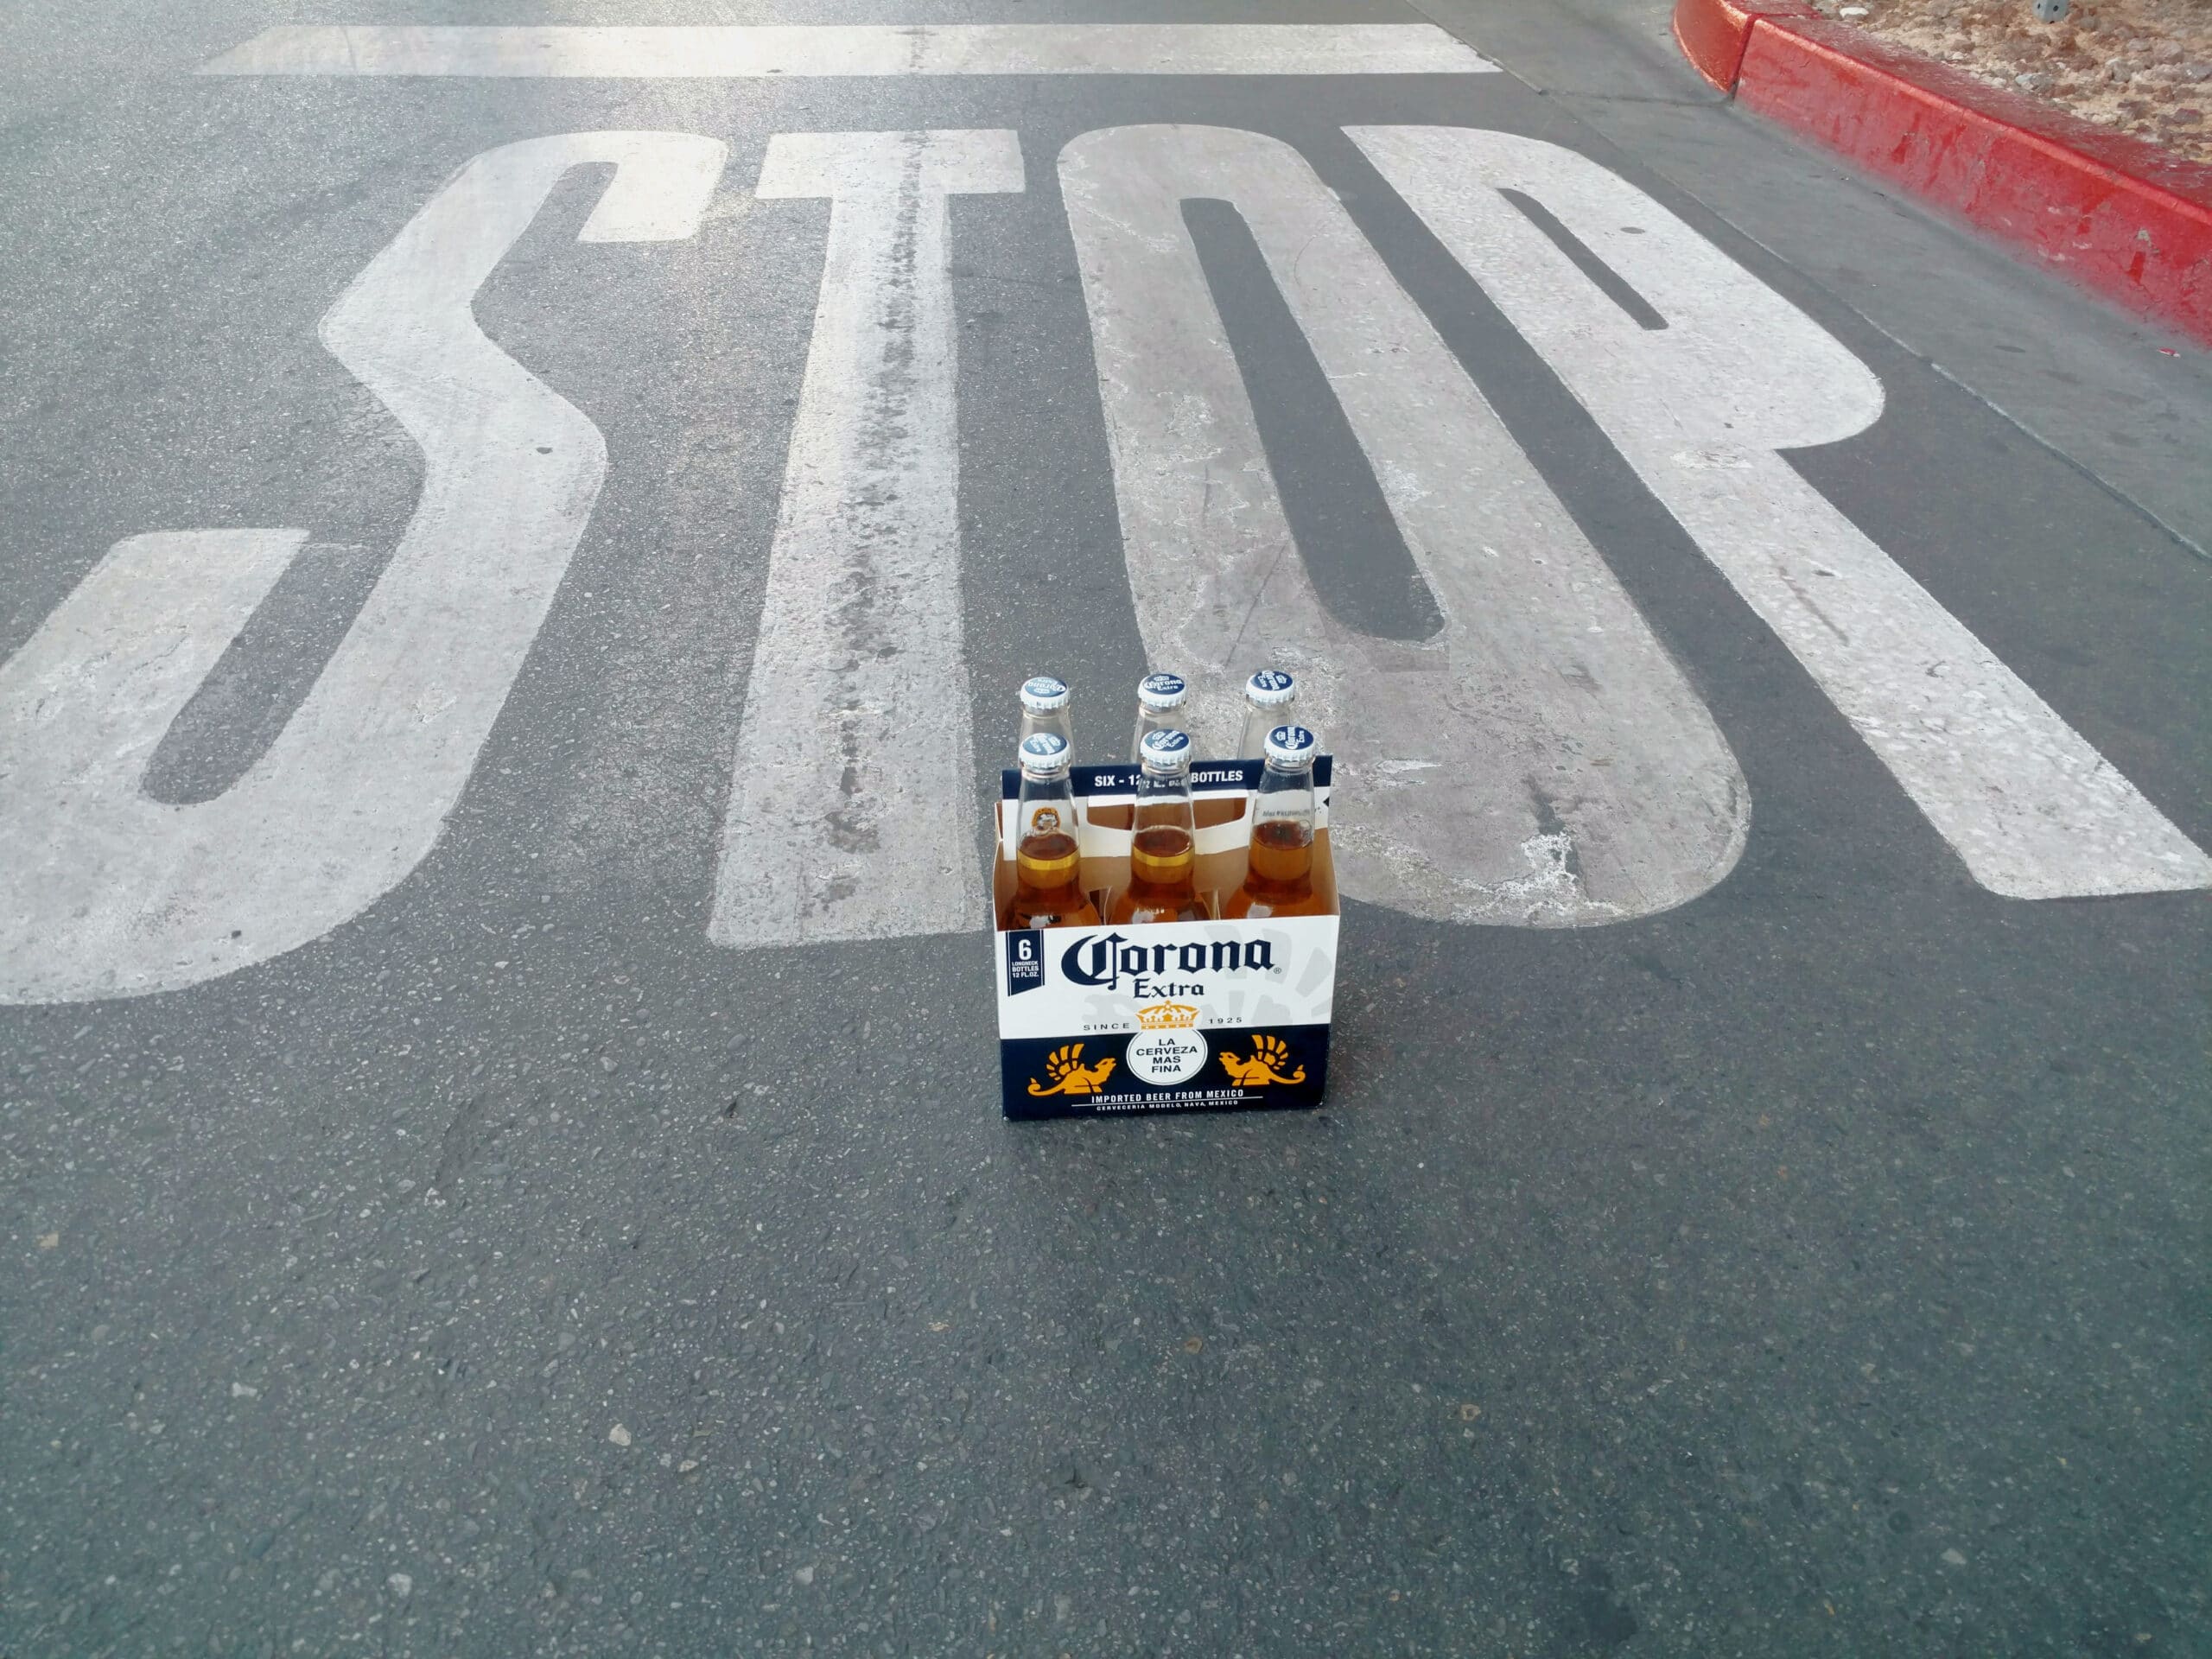 A pack of Corona beer bottles sits in front of a road Stop signal, indicating drunk driving prevention.